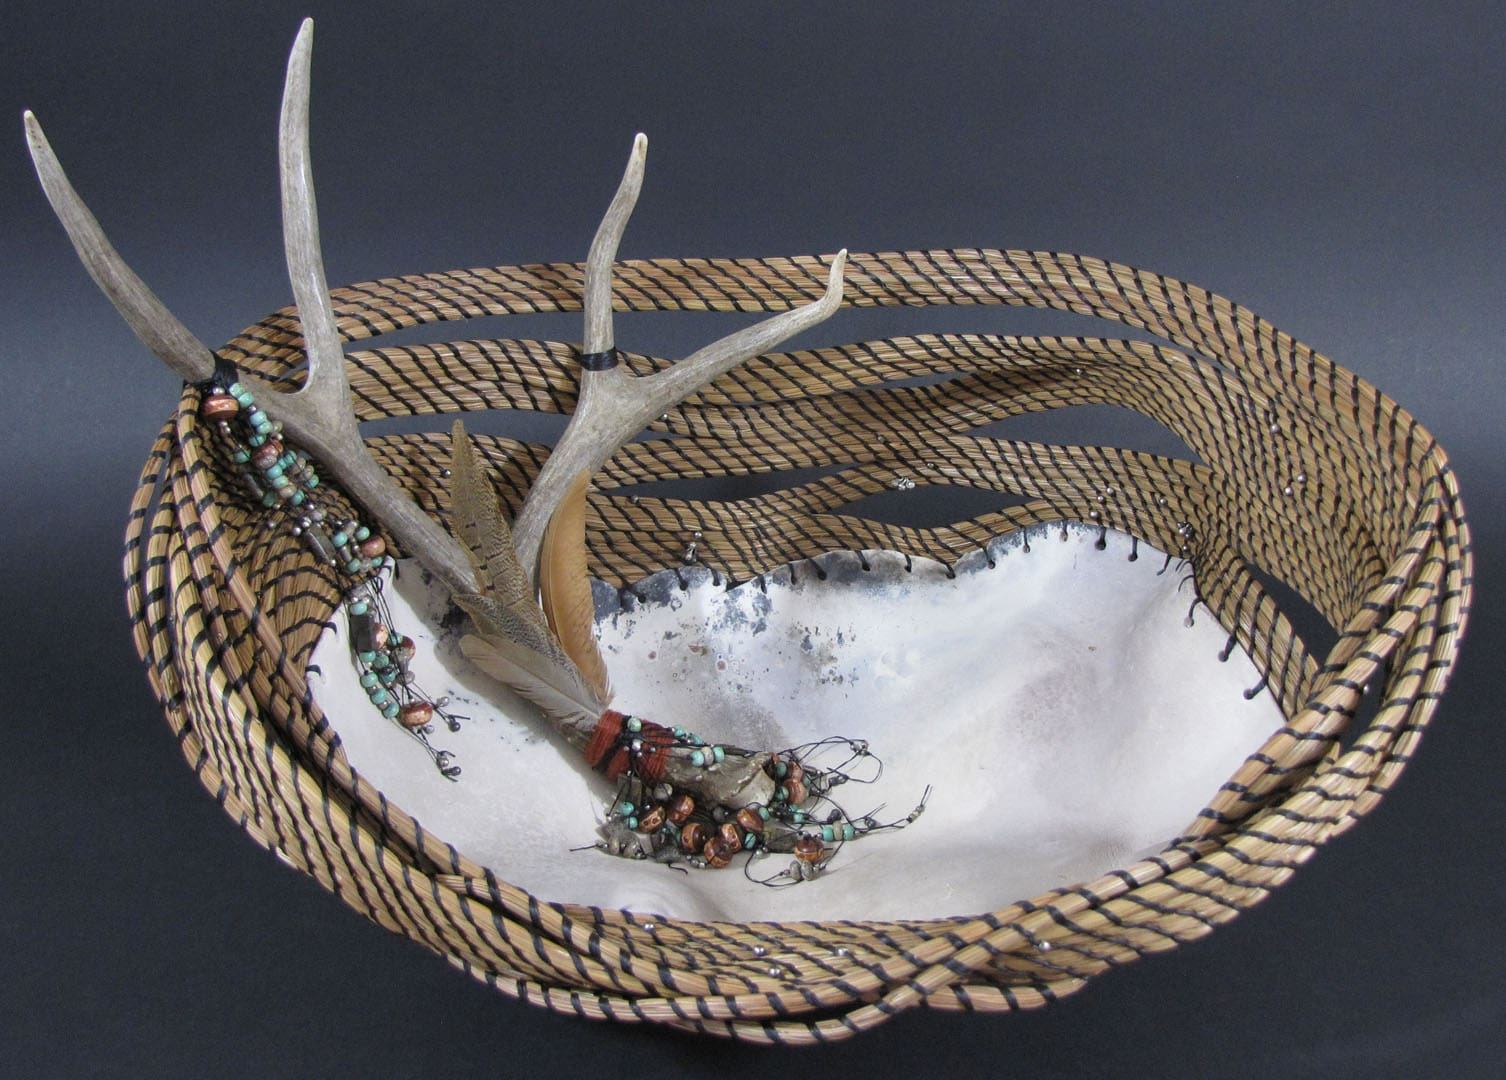 A bowl with antlers and beads on it.